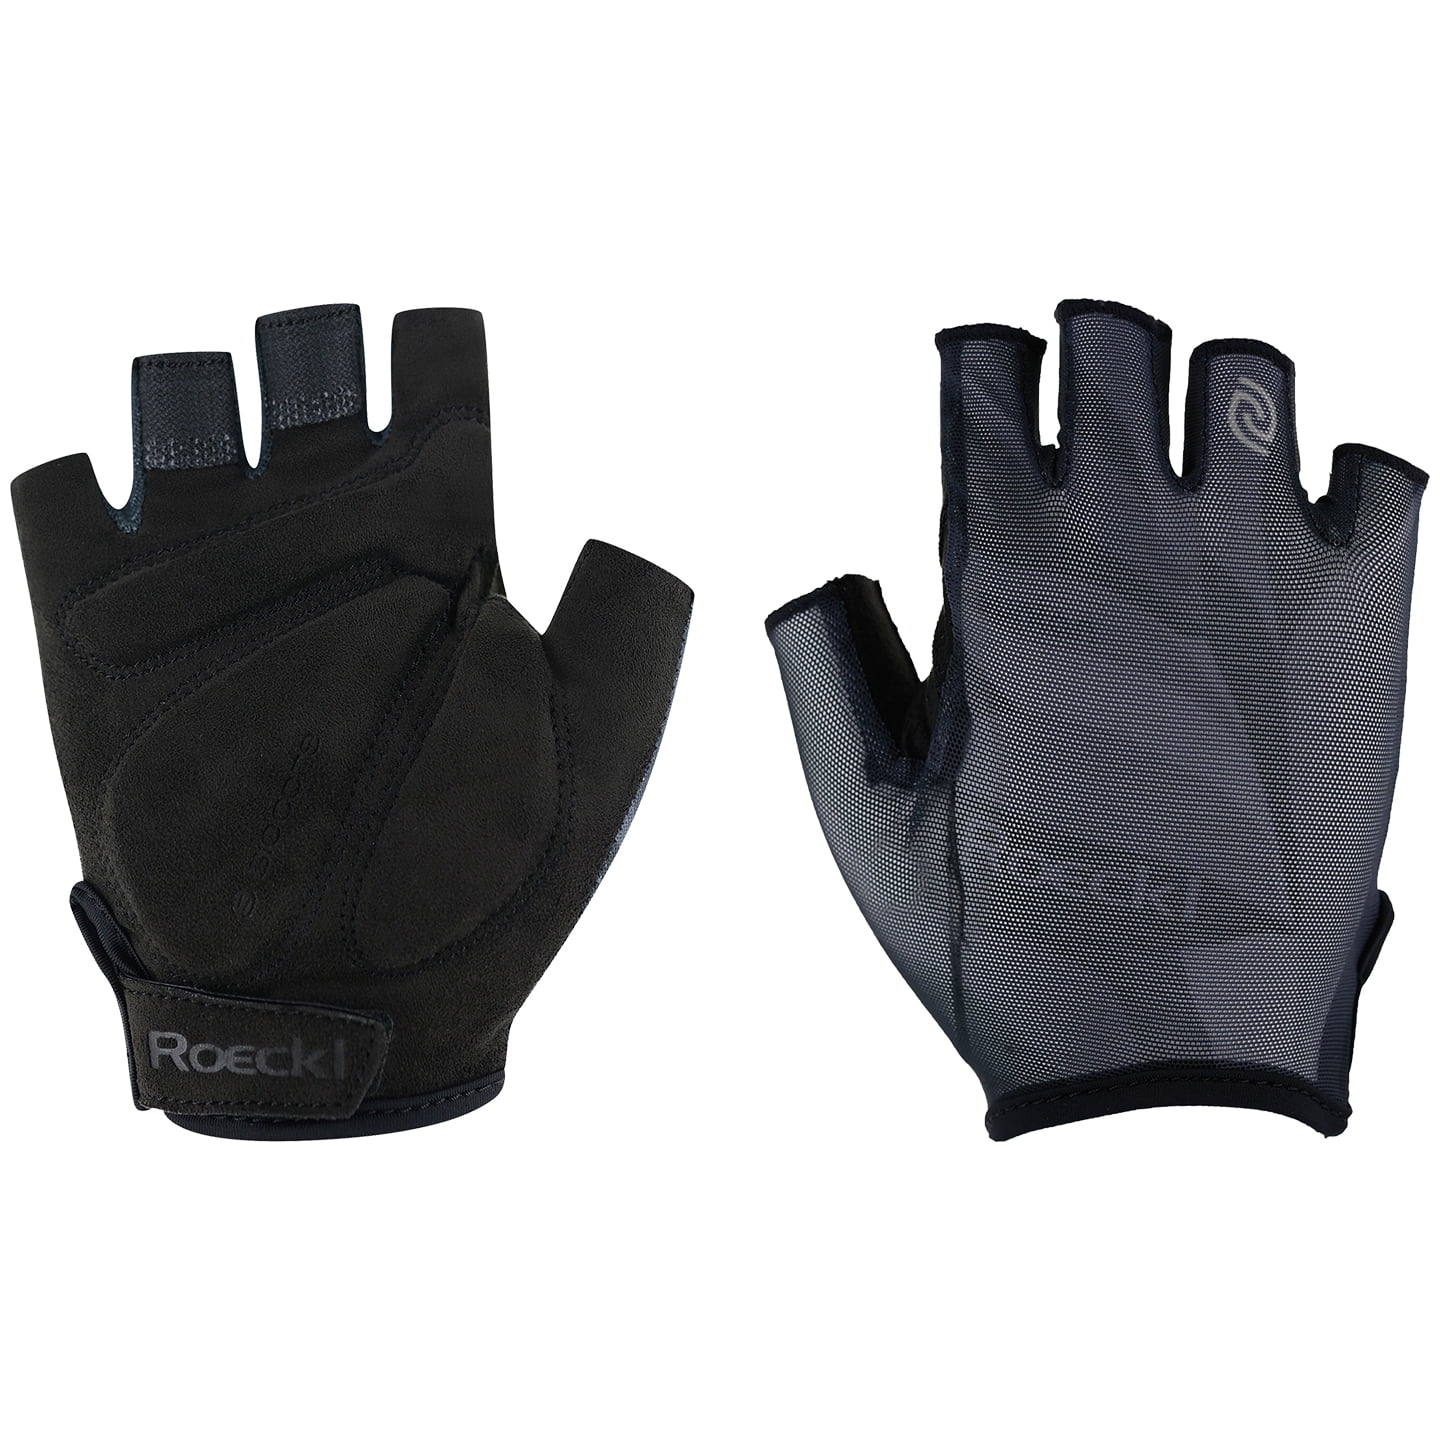 ROECKL Ibio Gloves, for men, size 9,5, Bike gloves, Cycling wear